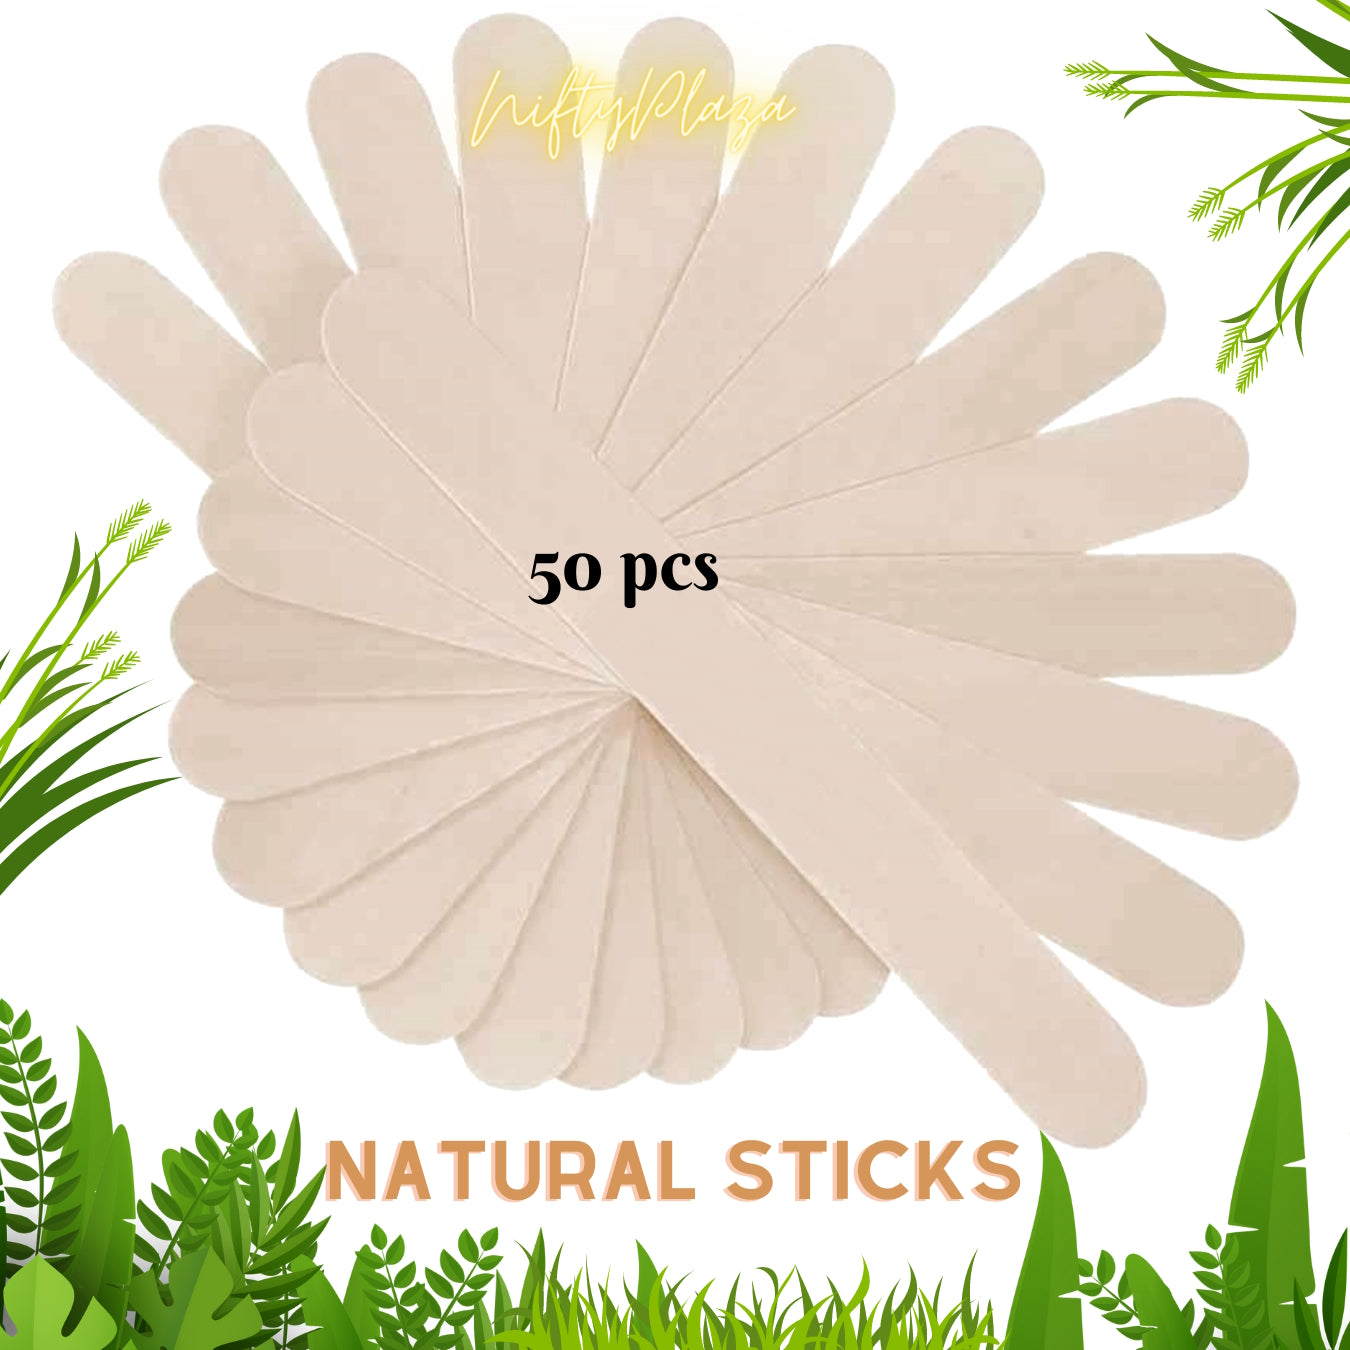 NiftyPlaza 50 Pieces Jumbo Craft Sticks, Natural Wood for Building, Mixing, Creating Craft Projects, 6 x 3/4